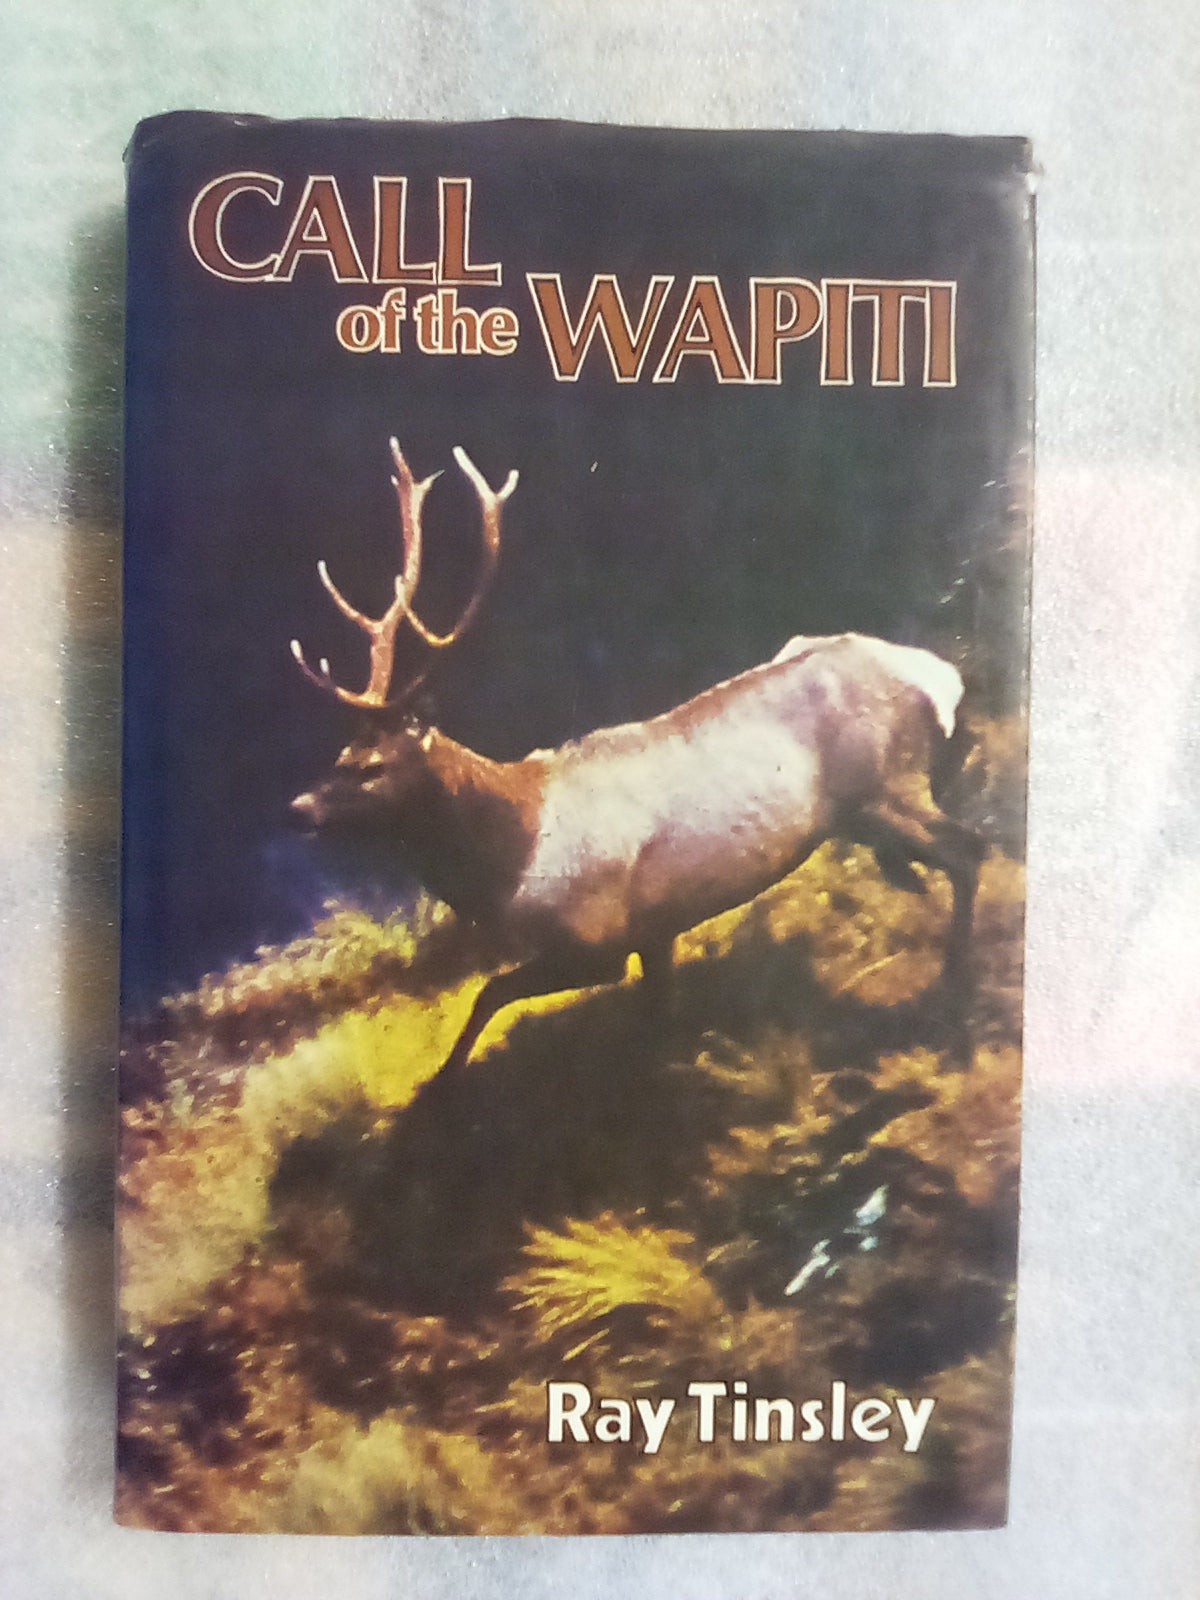 Call of the Wapiti (1979) by Ray Tinsley